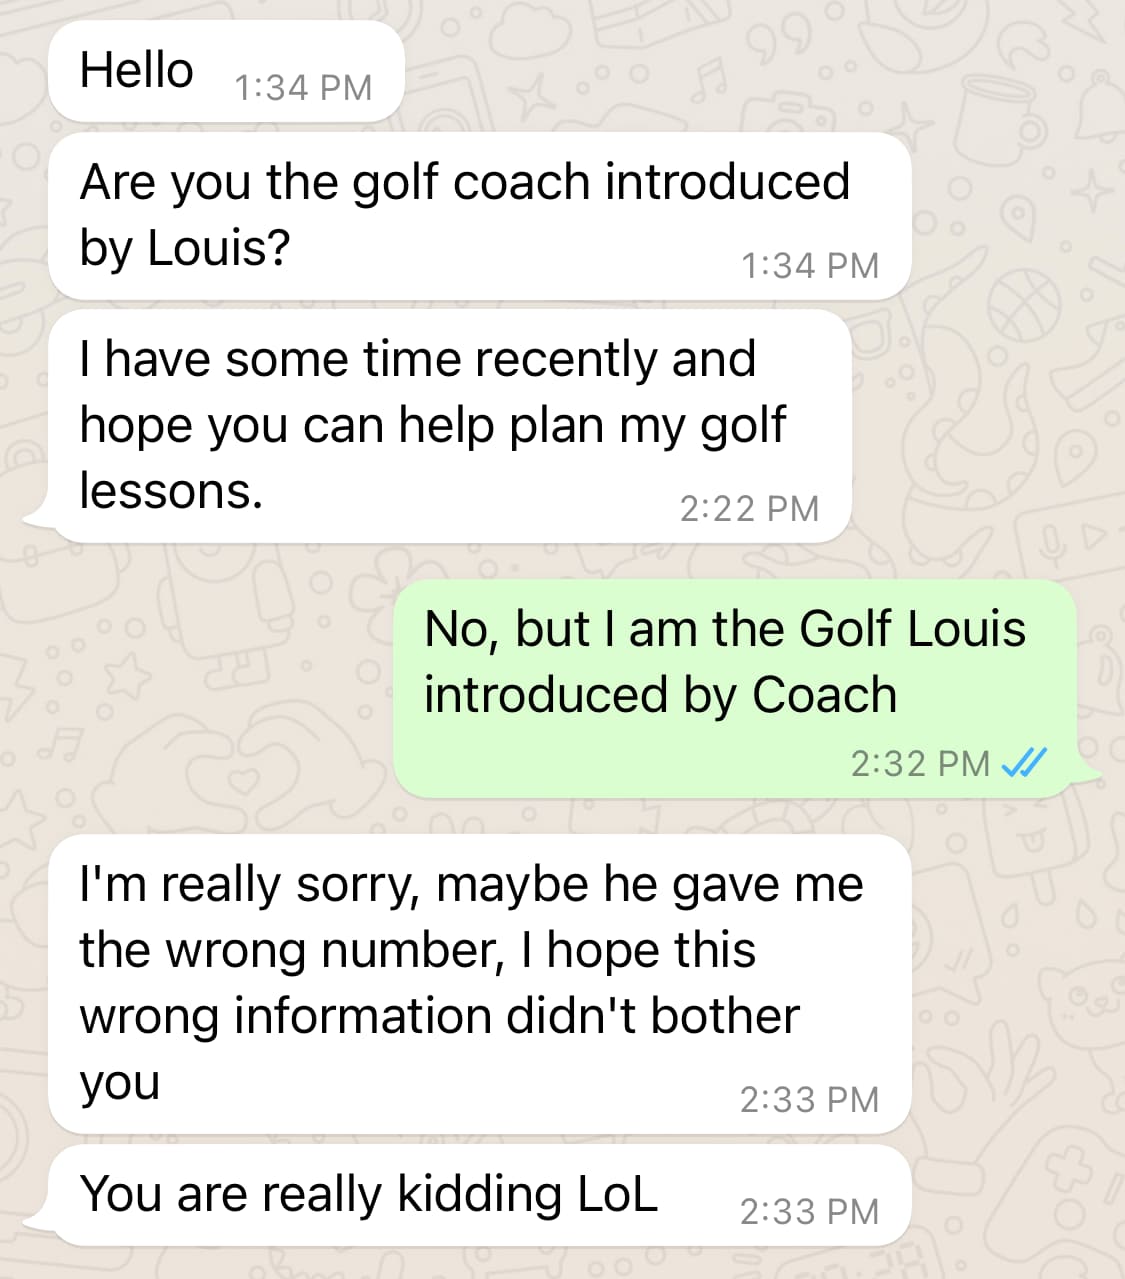 Screenshot. Them: Hello. Are you the golf coach introduced by Louis? I have some time recently and hope you can help plan my golf lessons. / Me: No, but I am the Golf Louis introduced by Coach / Them: I'm really sorry, maybe he gave me the wrong number, I hope this wrong information didn't bother you. You are really kidding LoL